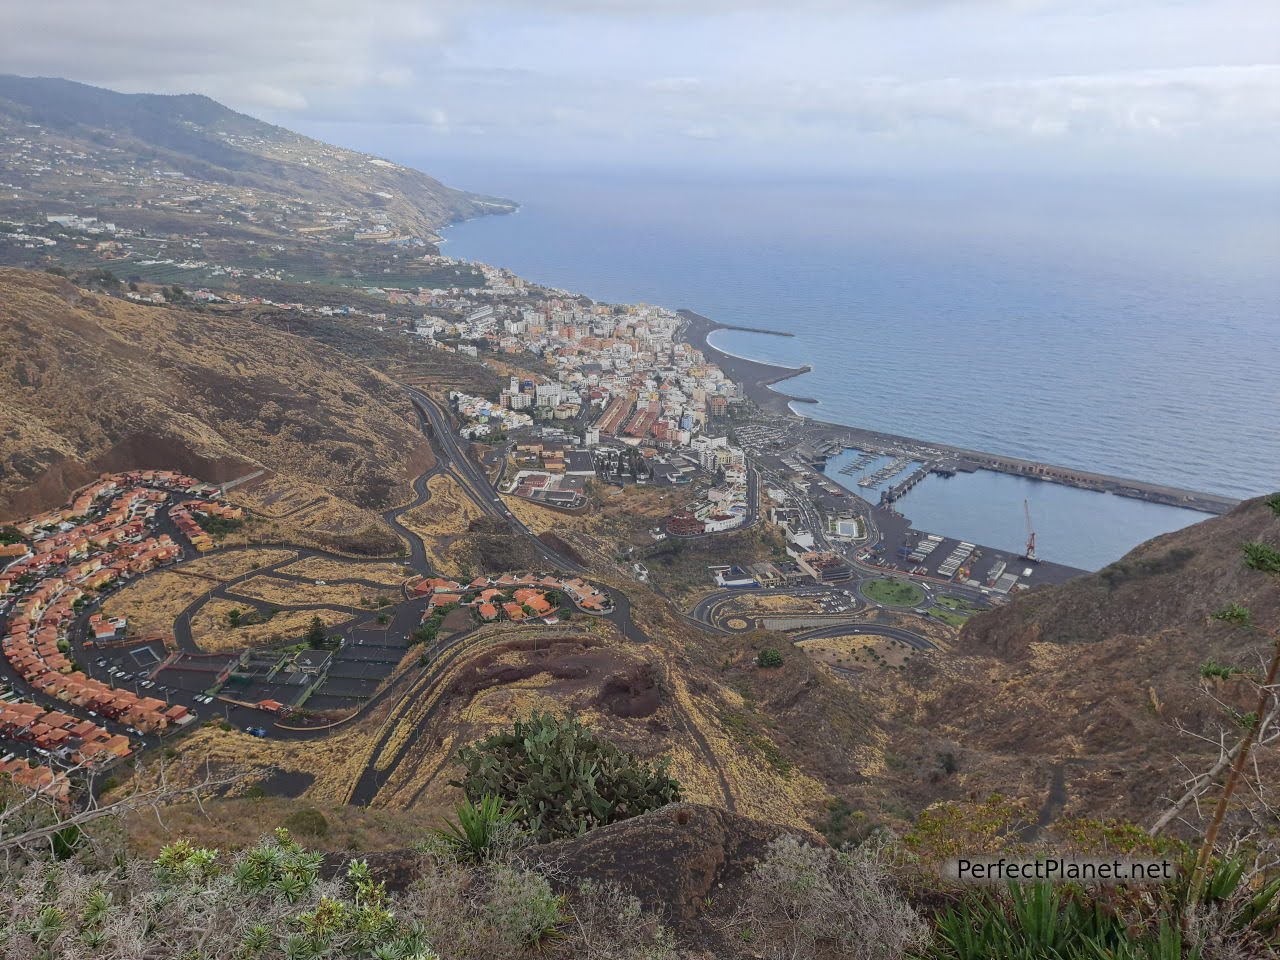 Views from the viewpoint of La Concepción